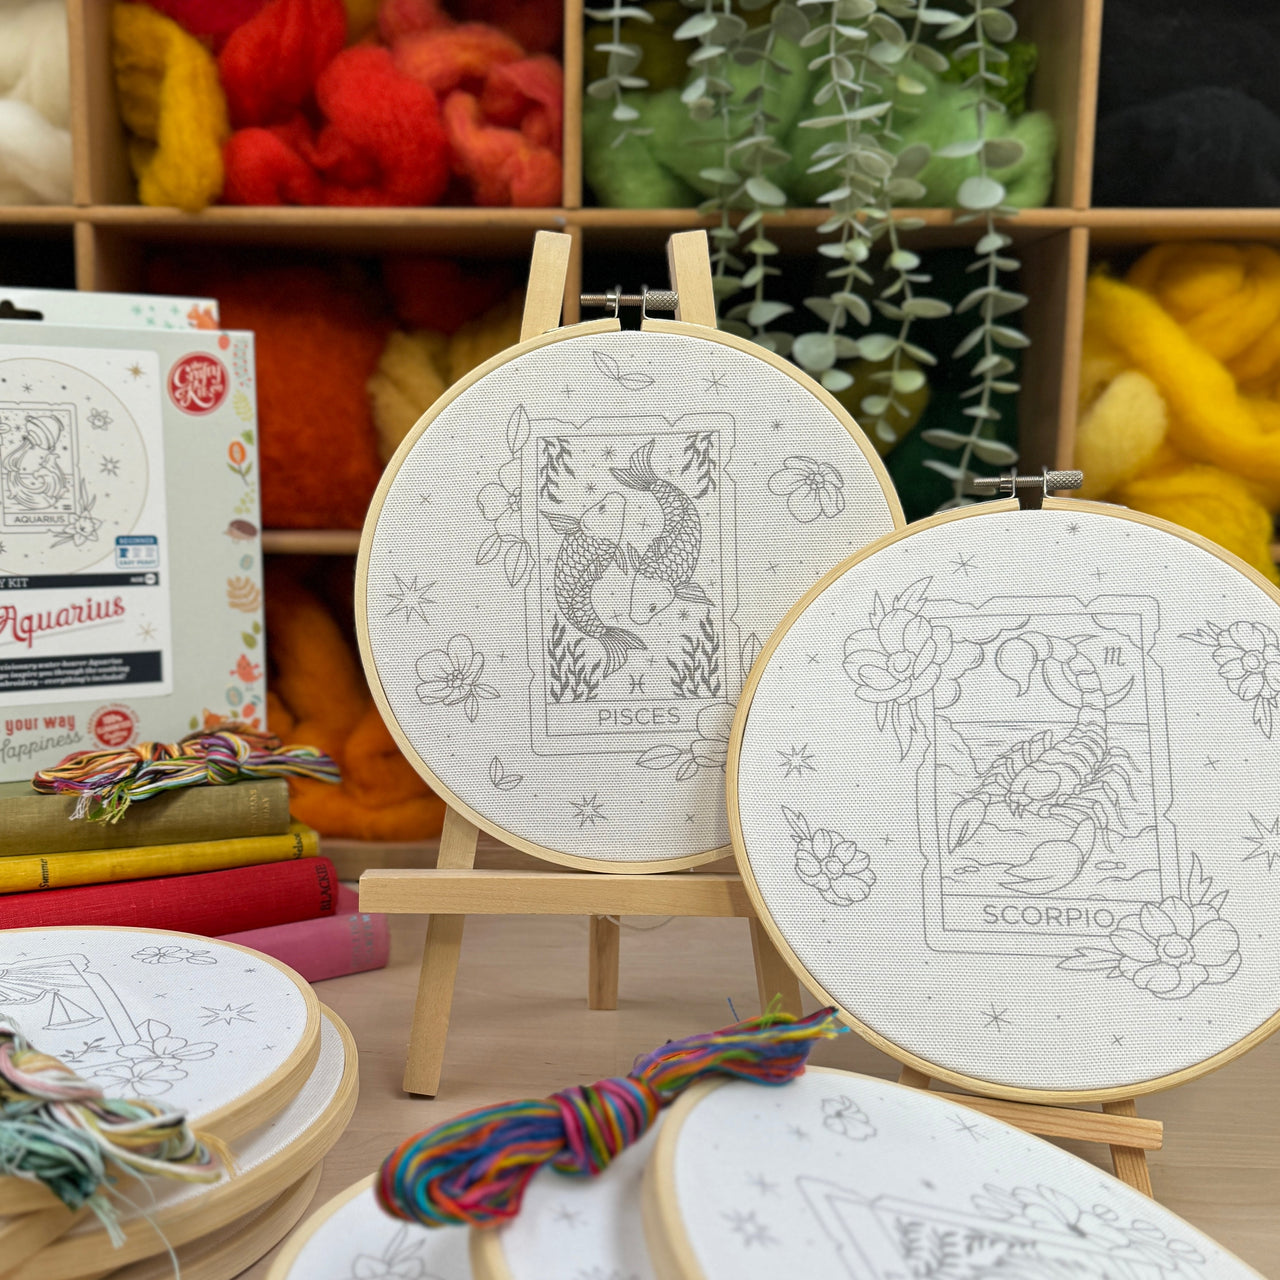 Signs of the Zodiac - Cancer Embroidery Kit